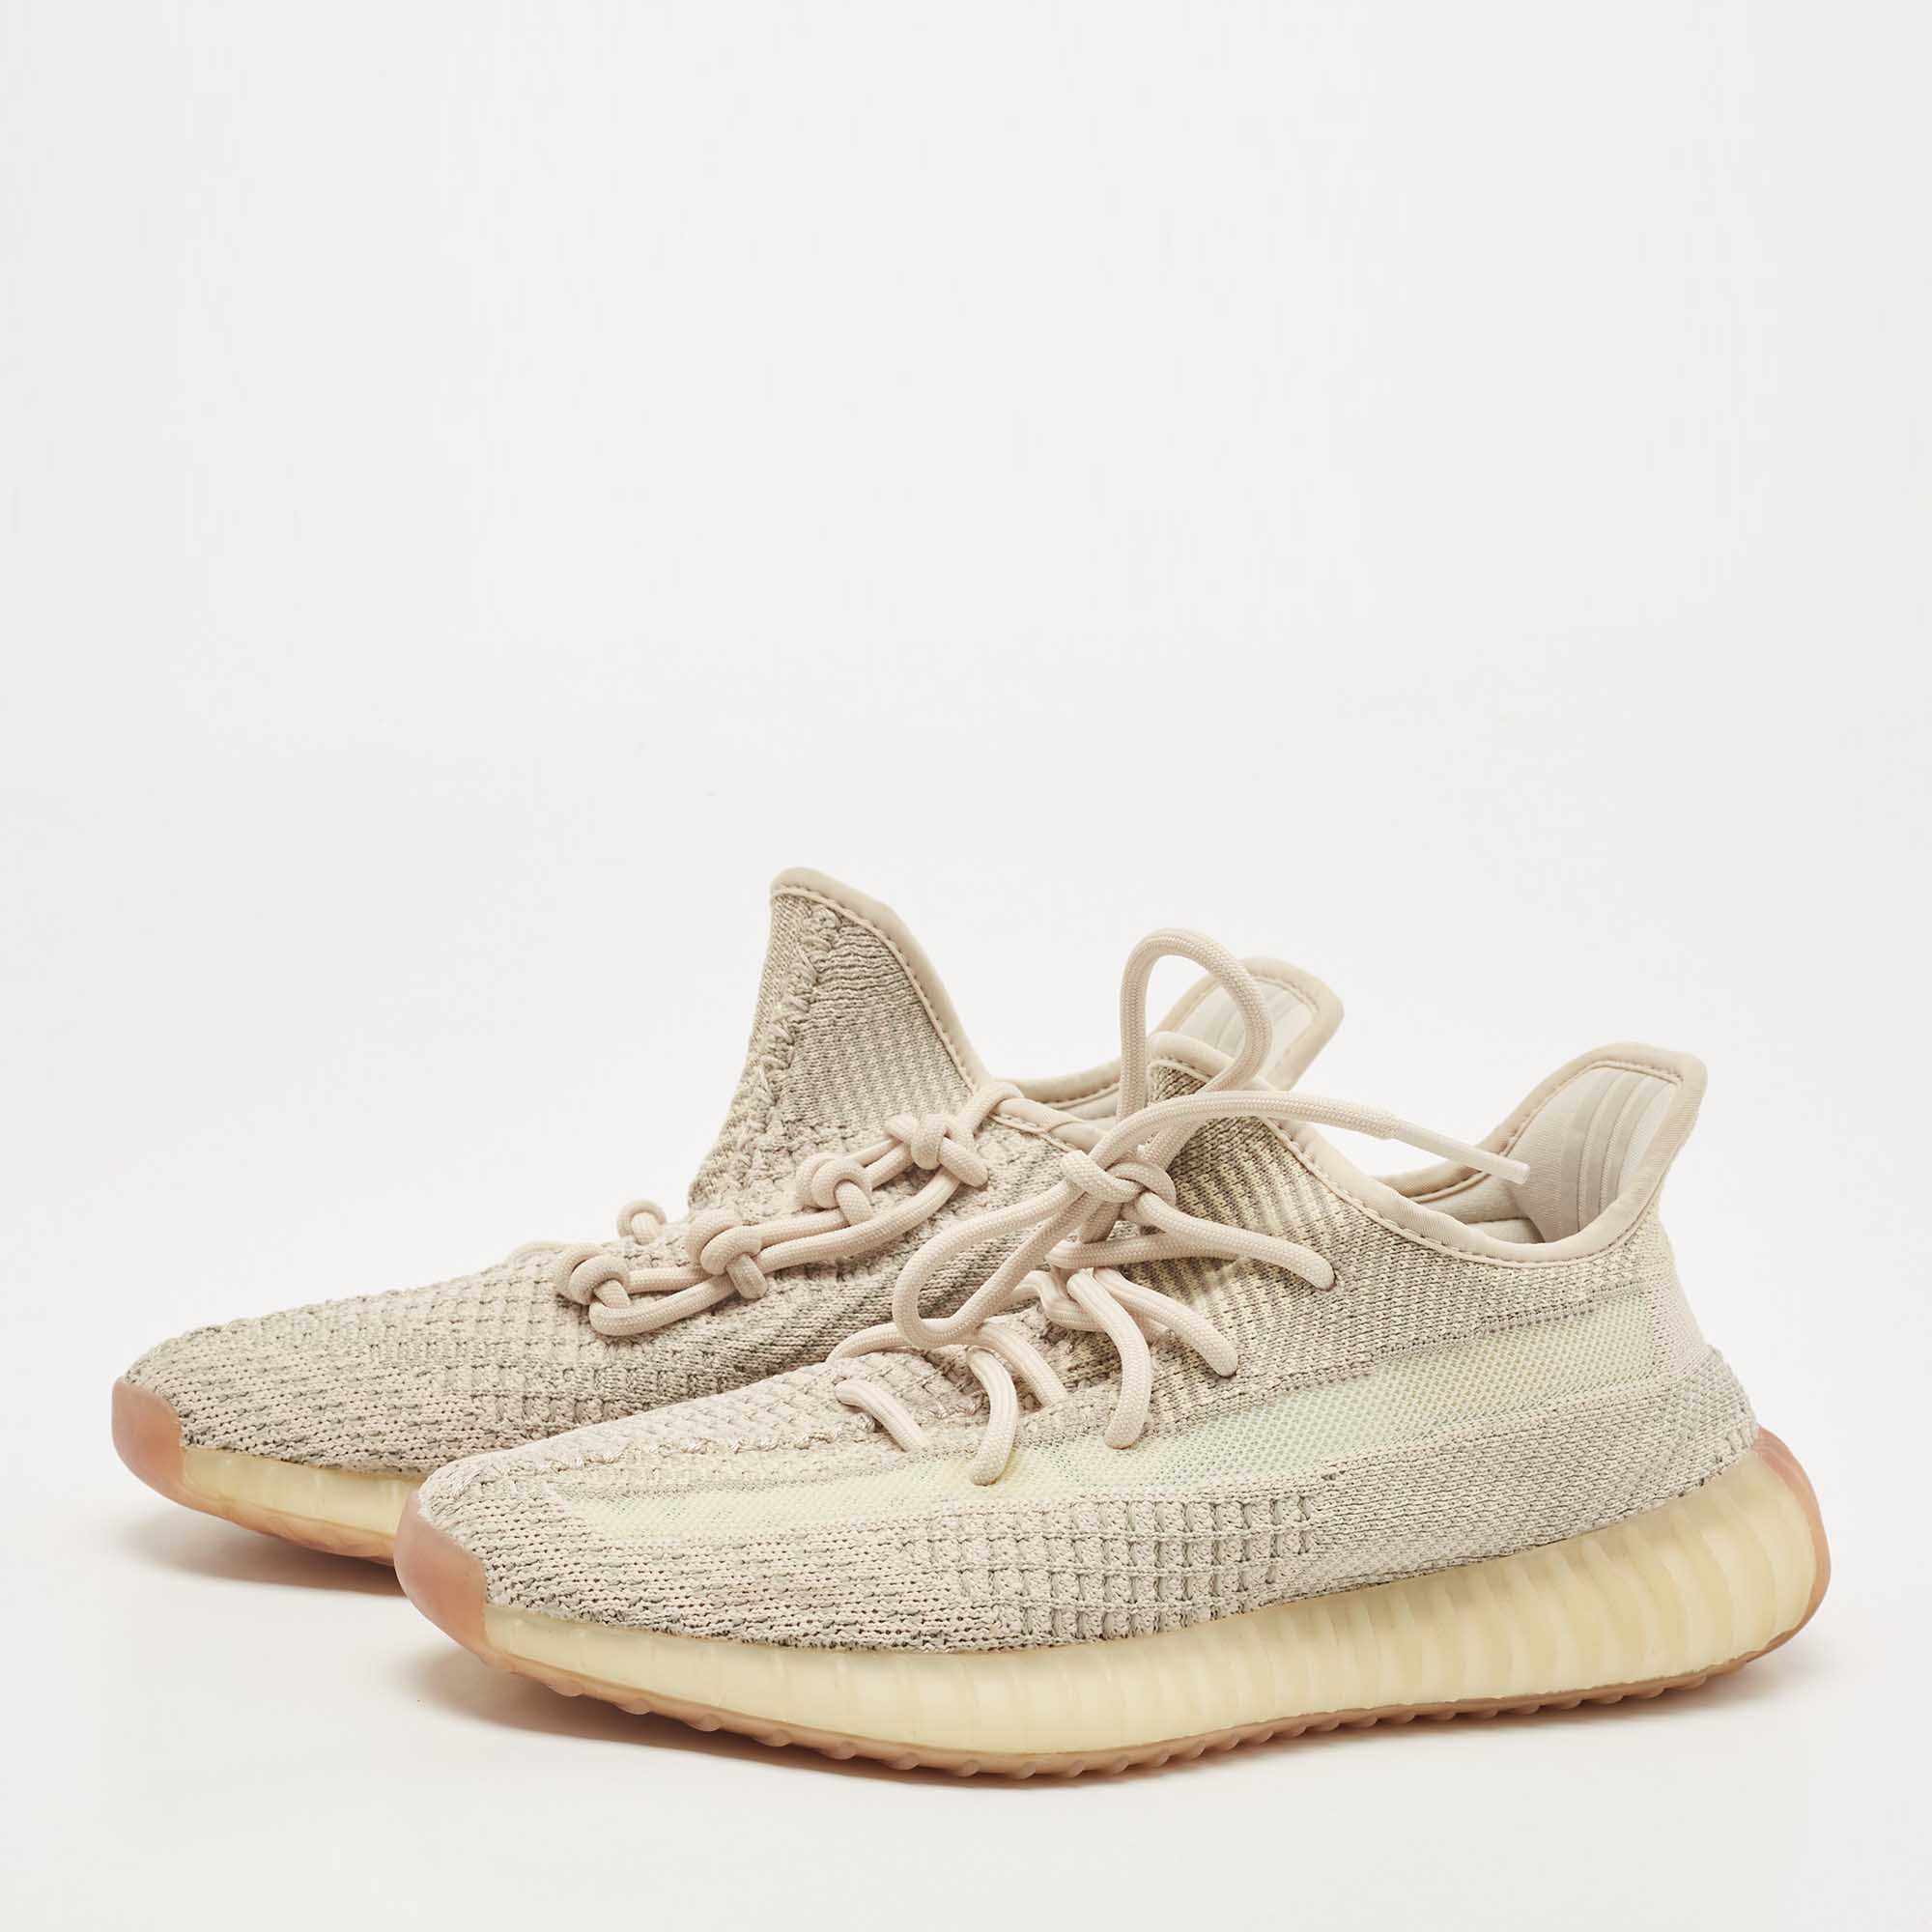 

Yeezy x Adidas Two Tone Knit Fabric Boost 350 V2 Citrin Sneakers Size  1/3, Beige